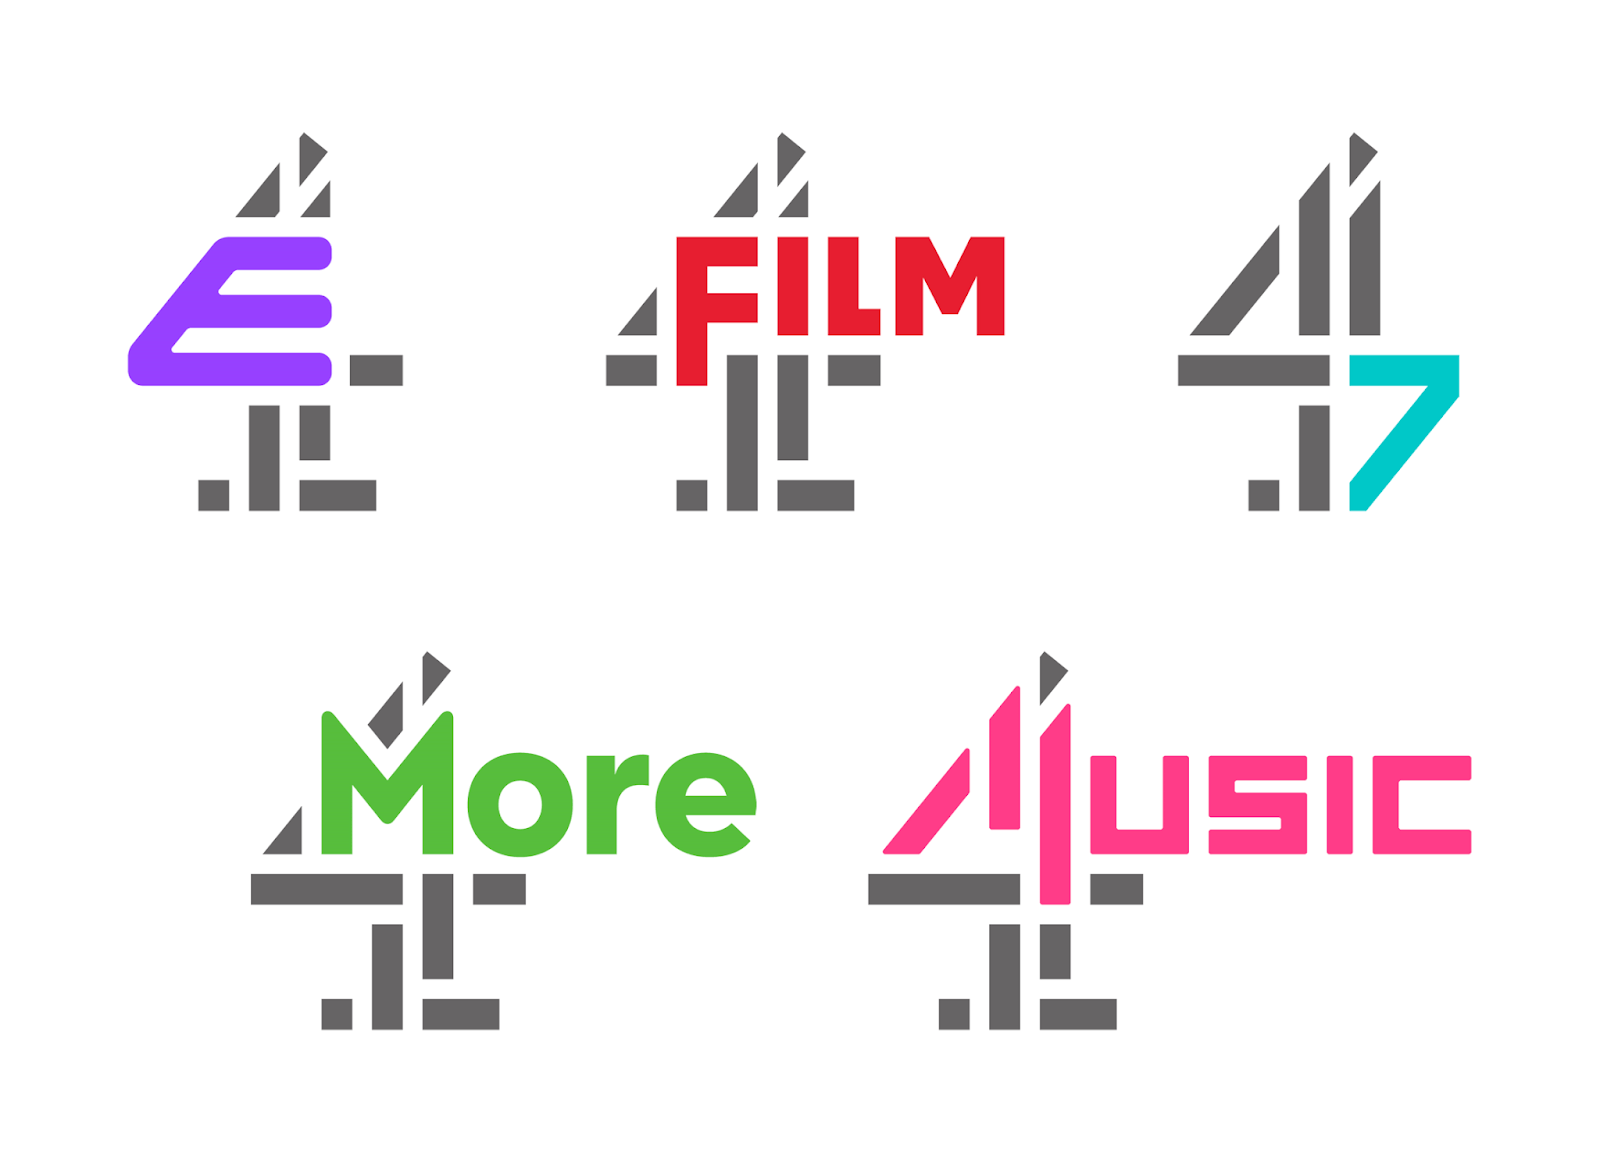 Channel 4 Logo - The Branding Source: Unified logos for Channel 4 thematic channels